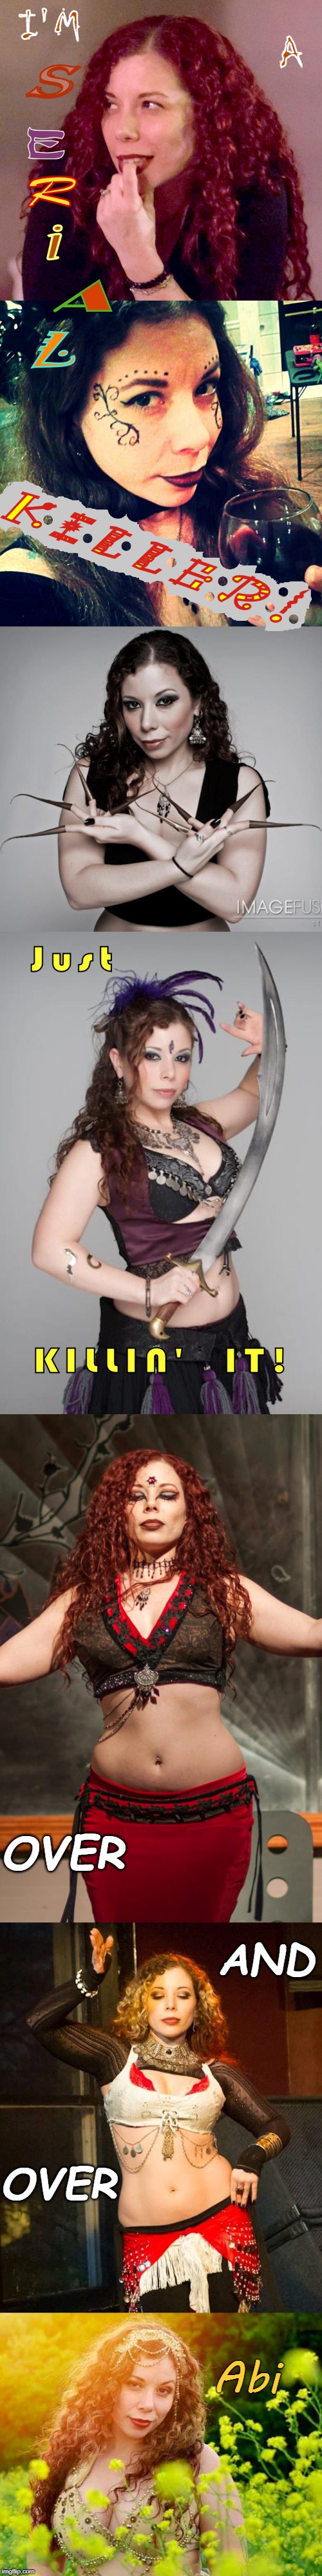 She's a SERIAL KILLER | I'M A SERIAL KILLER! JUST KILLIN' IT! OVER; AND; OVER; Abi | image tagged in bellydancing,fun,memes,dancer,serial killer | made w/ Imgflip meme maker